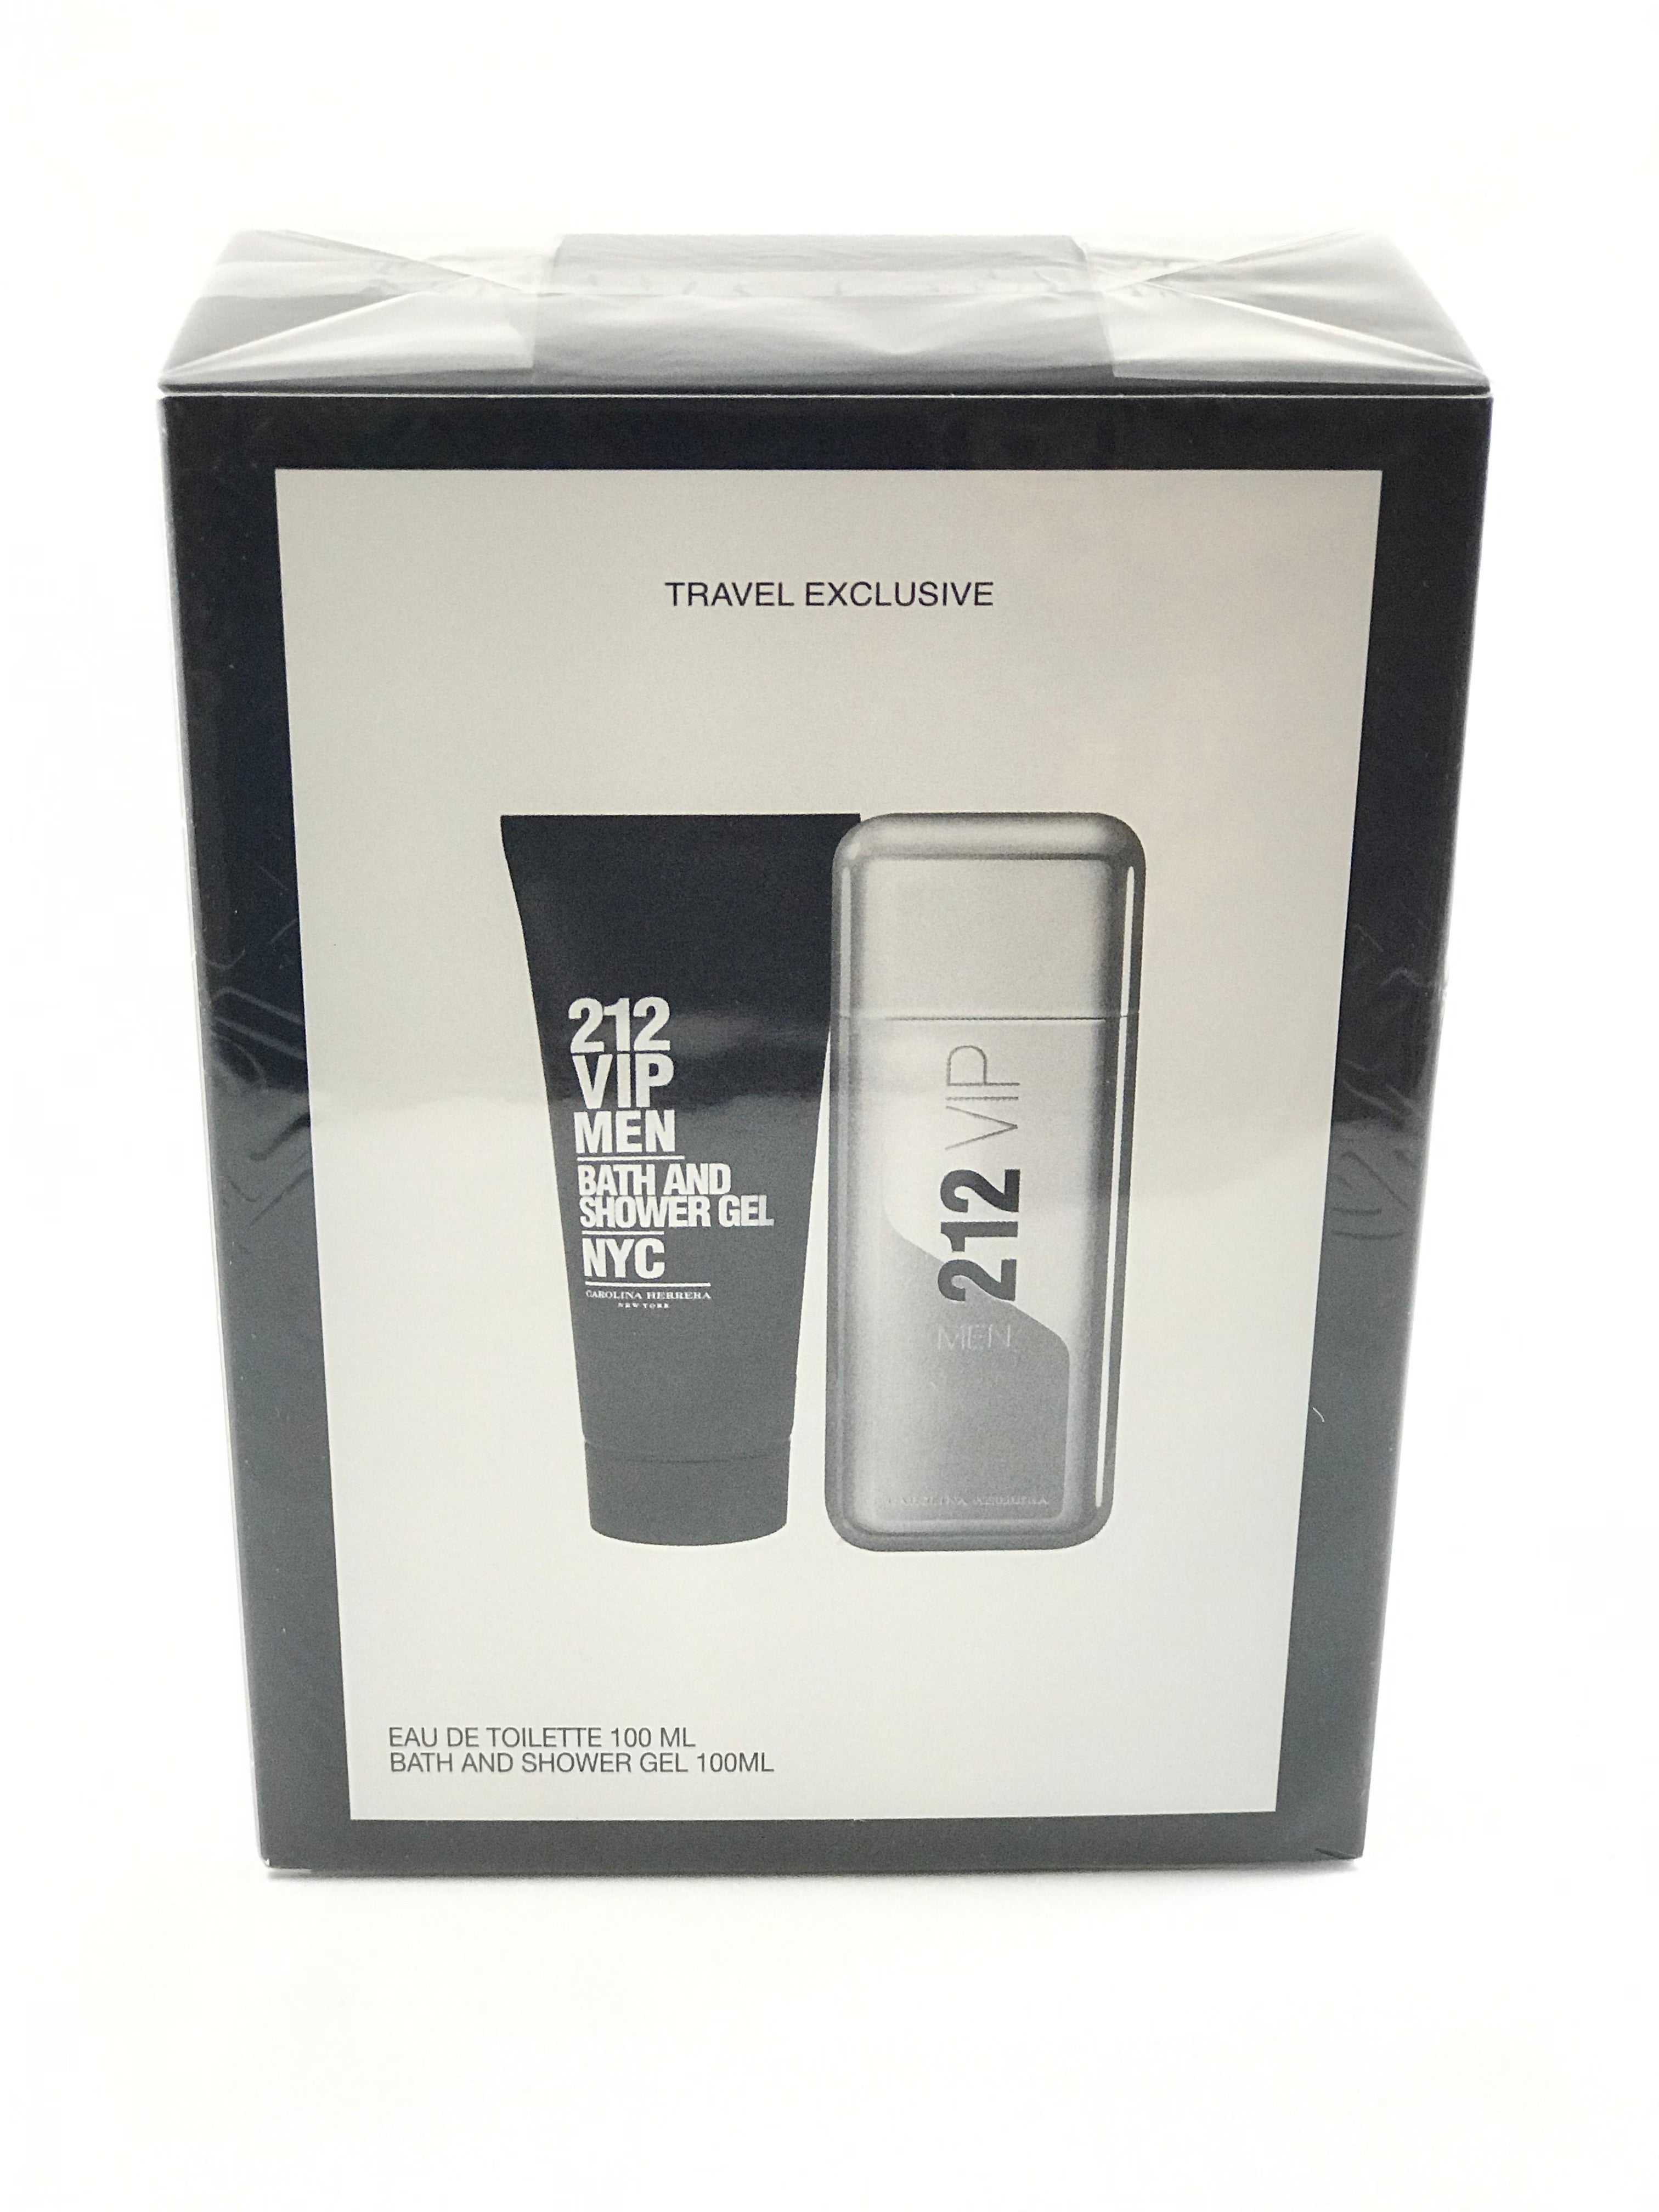 212 Vip men bath . and gel nyc , travel set exclusive 2pc EDT 3 – special perfumes & gifts